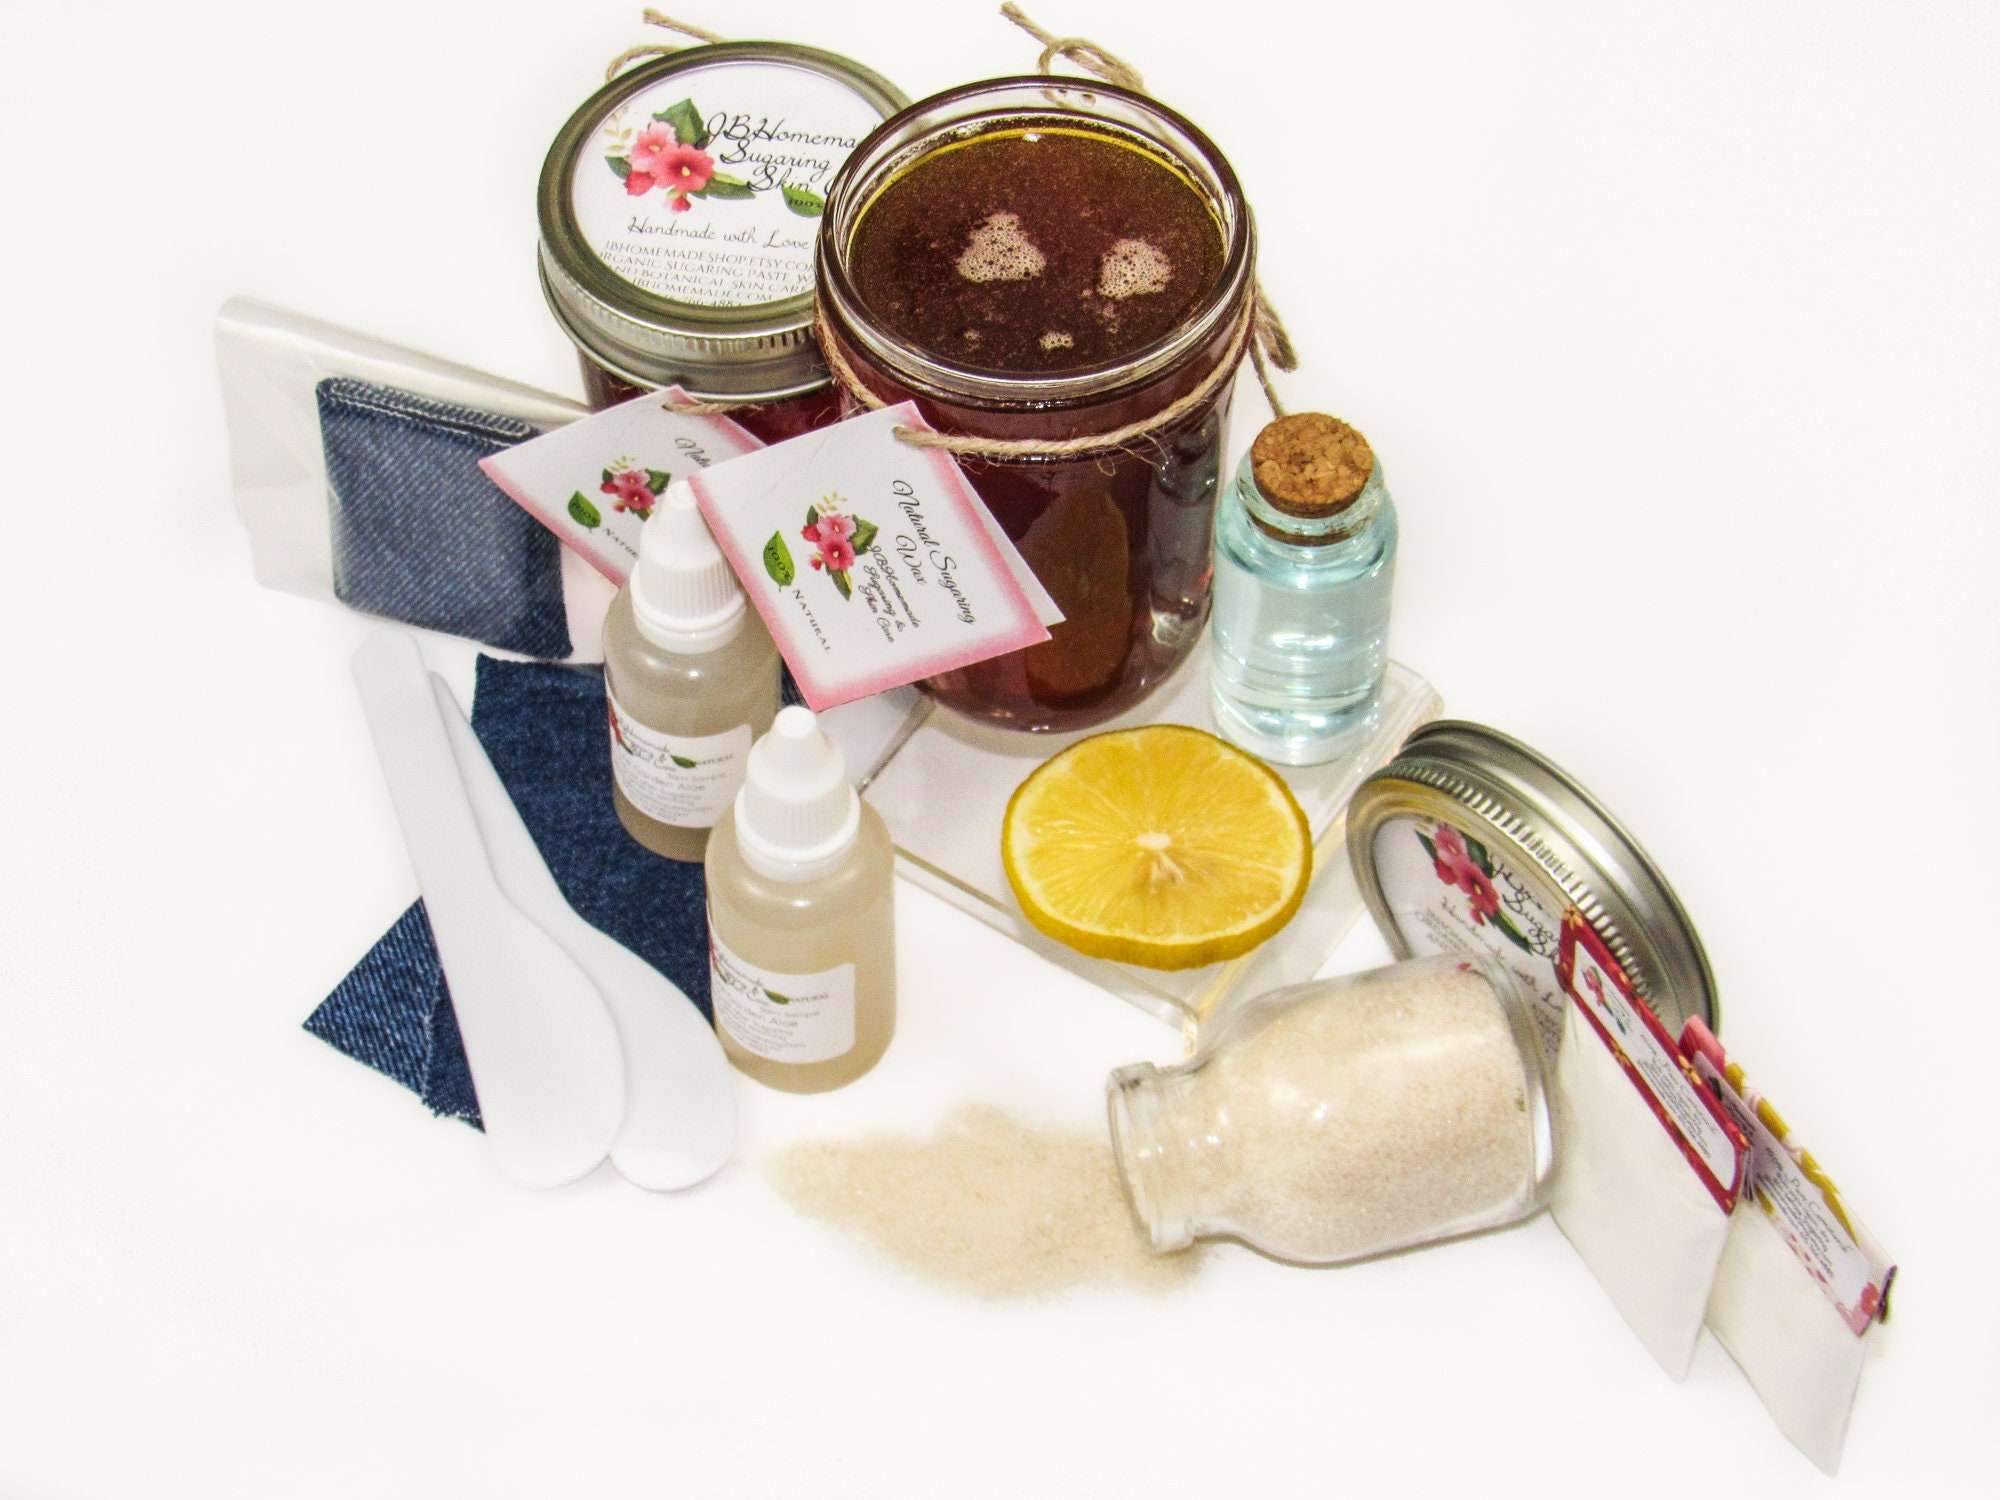 Two 8 oz masons of JBHomemade Sugaring Wax are presented with their included pouches of cornstarch, bottles of aloe vera, denim strips and applicators next to a slice of fresh lemon, a glass jar filled with clear blue water, and another jar tipped over, spilling cane sugar, accentuating the natural ingredients.